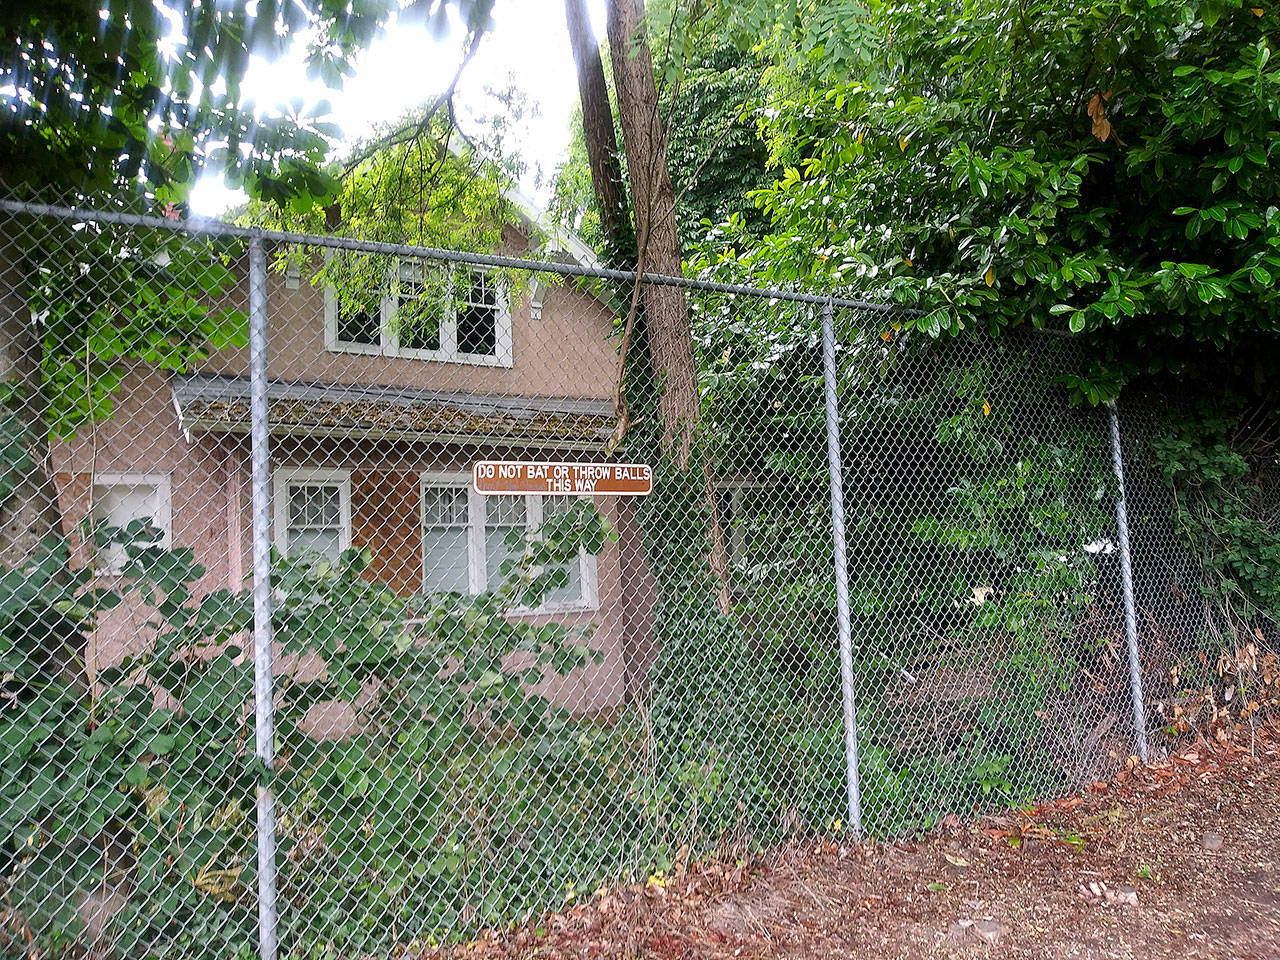 The property at 610 M St. NE on which a California developer is proposing to put an Enhanced Services Facility to house patients released from state or local psychiatric hospitals in preparation to reenter society is just beyond this fence, in the northeast corner of Fulmer Park, and immediately south of the Church of Jesus Christ of Latter-day Saints. ROBERT WHALE, Auburn Reporter